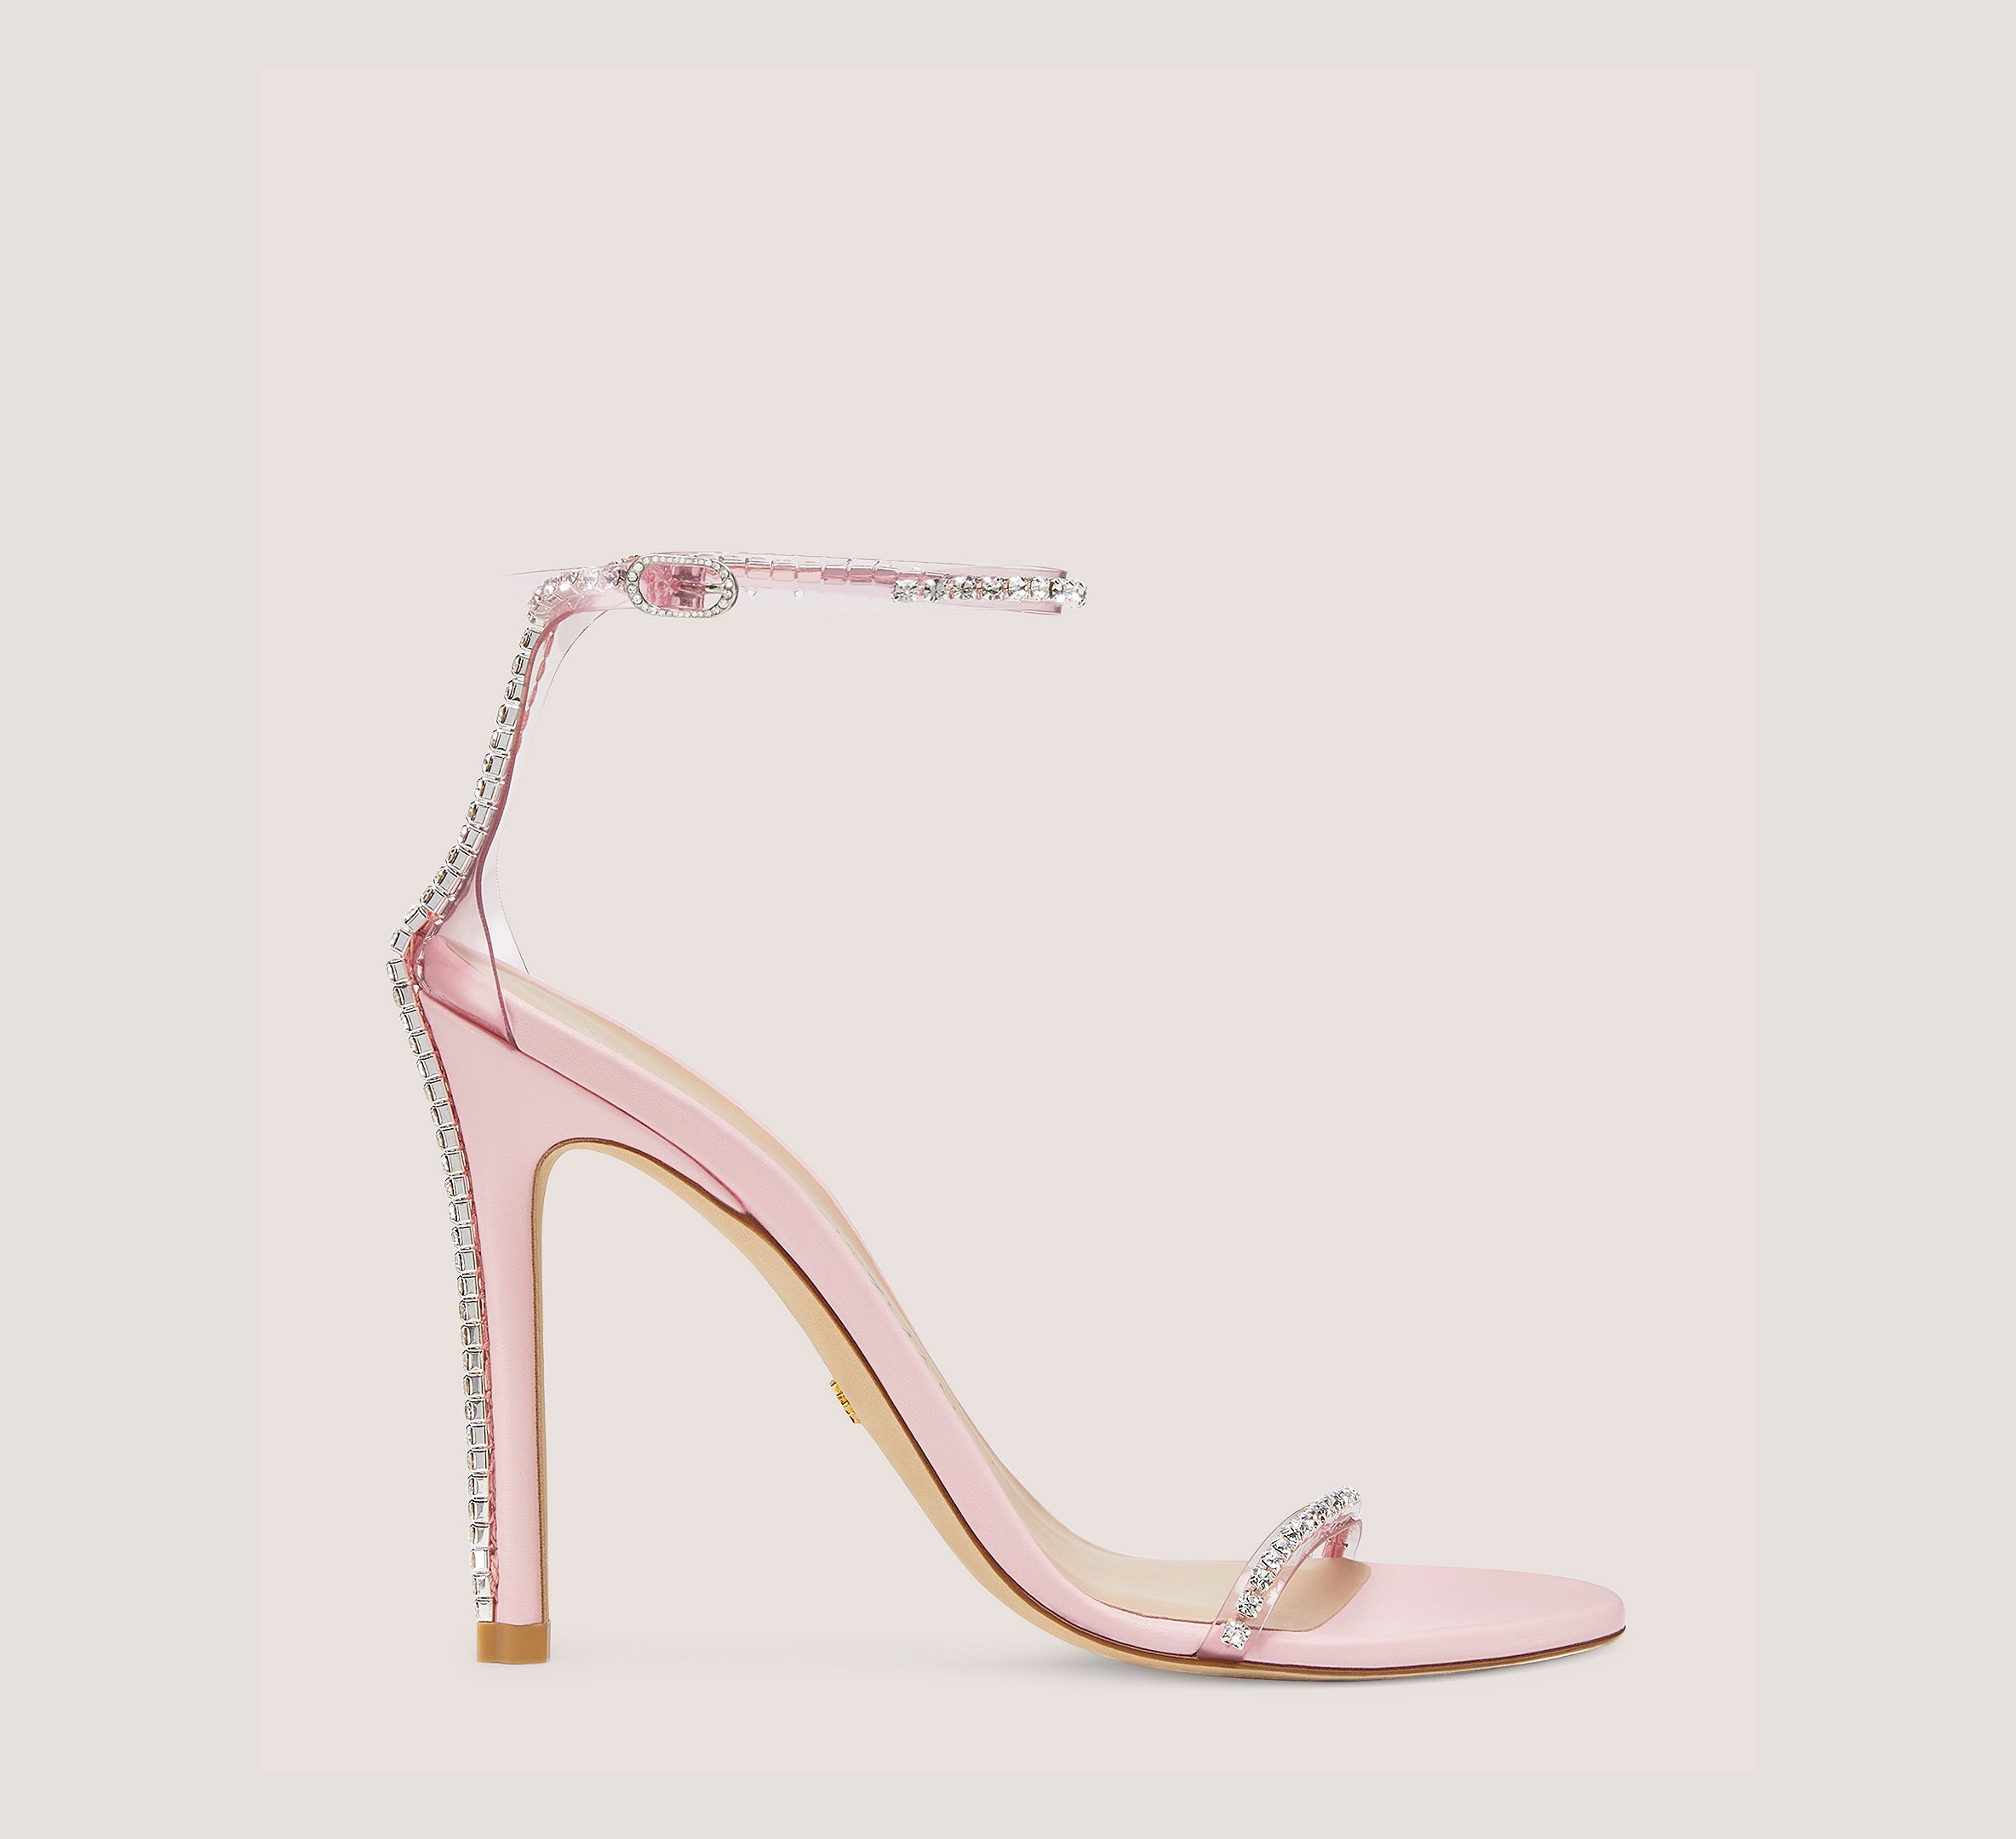 Stuart Weitzman Nudistglam 110 Sandal The Sw Outlet In Light Pink/cotton Candy/clear